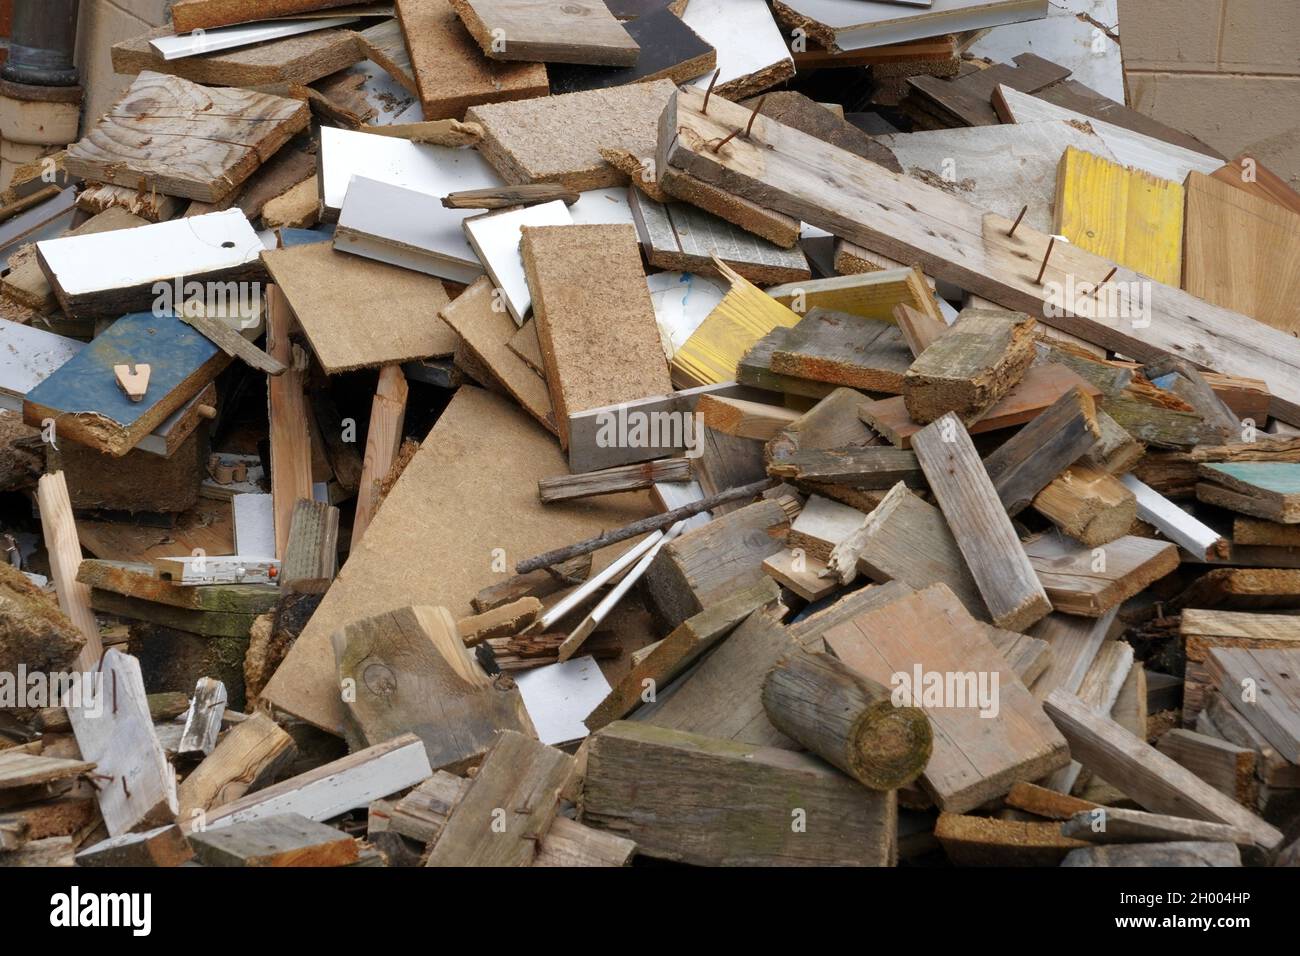 Dismantled furniture cut into pieces. There are pieces of wood. They are of irregular size. It looks like vacating of a dwelling. Detail view. Stock Photo